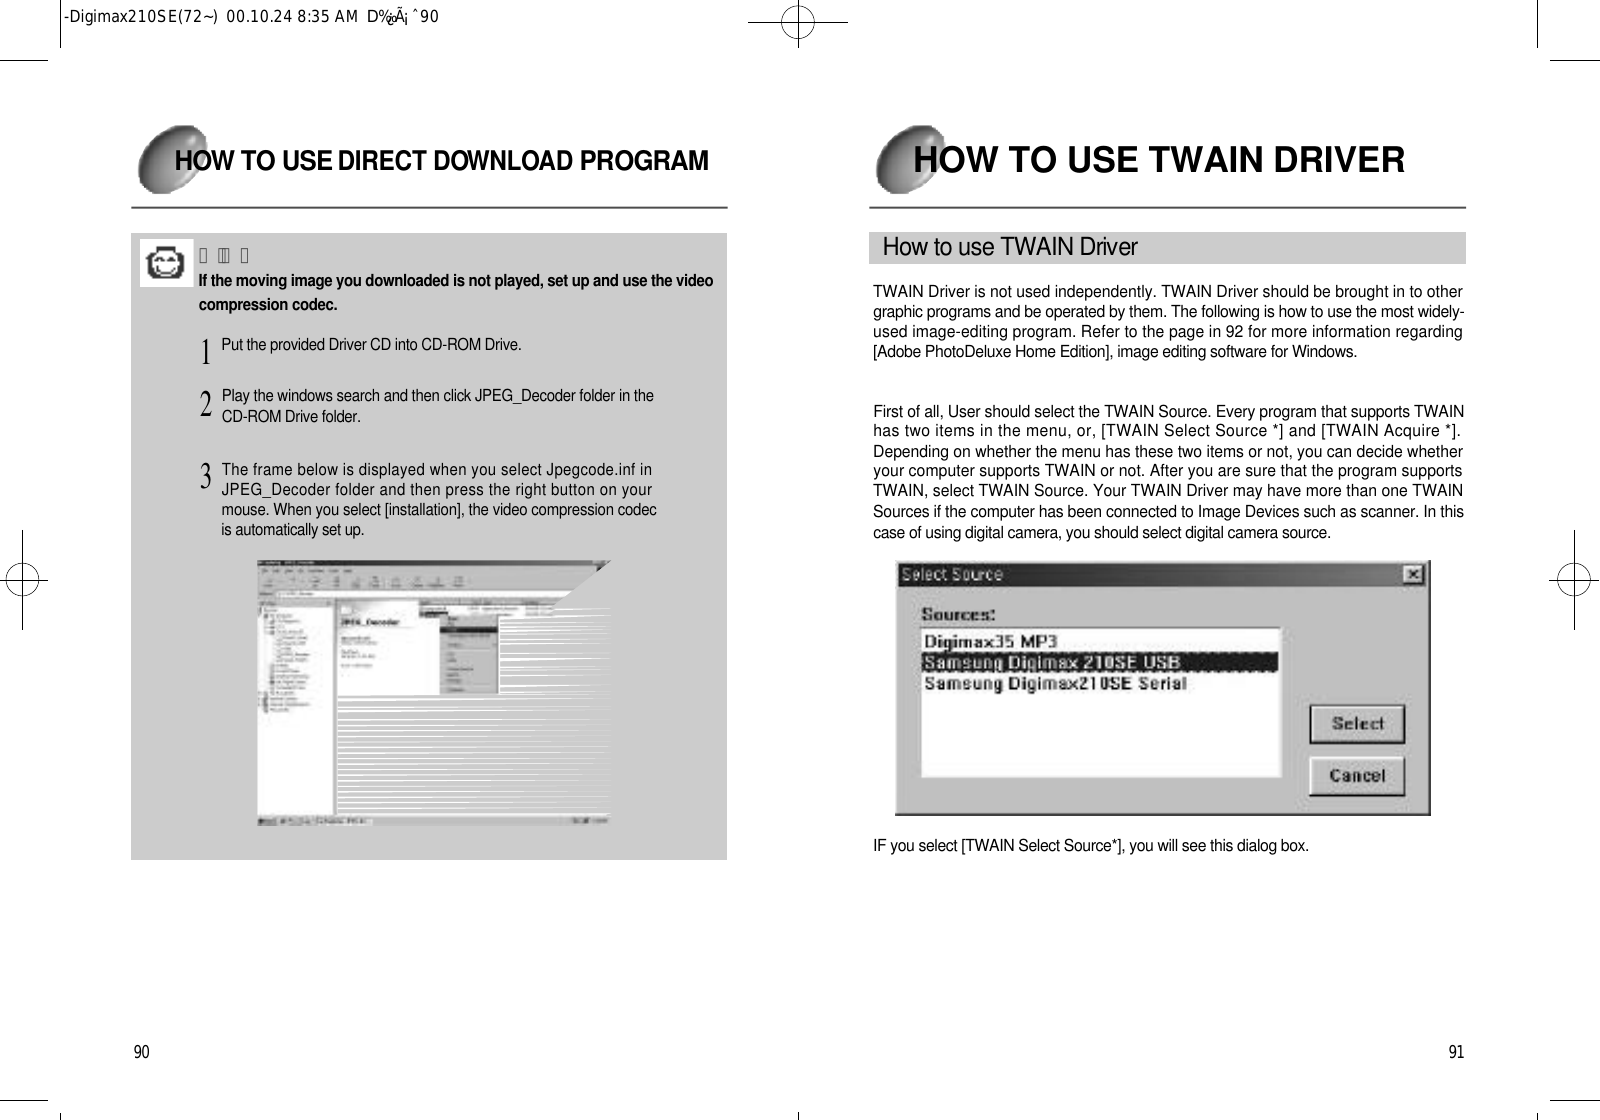 9 1HOW TO USE TWAIN DRIVERH o w to use TWAIN Dri ve rTWAIN Driver is not used independently. TWAIN Driver should be brought in to othergraphic programs and be operated by them. The following is how to use the most widely-used image-editing program. Refer to the page in 92 for more information regarding[Adobe PhotoDeluxe Home Edition], image editing software for Windows.First of all, User should select the TWAIN Source. Every program that supports TWAINhas two items in the menu, or, [TWAIN Select Source *] and [TWAIN Acquire *].Depending on whether the menu has these two items or not, you can decide whetheryour computer supports TWAIN or not. After you are sure that the program supportsTWAIN, select TWAIN Source. Your TWAIN Driver may have more than one TWAINSources if the computer has been connected to Image Devices such as scanner. In thiscase of using digital camera, you should select digital camera source.IF you select [TWAIN Select Source*], you will see this dialog box.9 0H OW TO USE DIRECT DOW N L OAD P RO G R A MÂü°íIf the moving image you downloaded is not played, set up and use the videocompression codec.Put the provided Driver CD into CD-ROM Drive.1Play the windows search and then click JPEG_Decoder folder in theCD-ROM Drive folder.2The frame below is displayed when you select Jpegcode.inf inJPEG_Decoder folder and then press the right button on yourmouse. When you select [installation], the video compression codecis automatically set up.3-Digimax210SE(72~)  00.10.24 8:35 AM  D‰¿Ã¡ˆ90